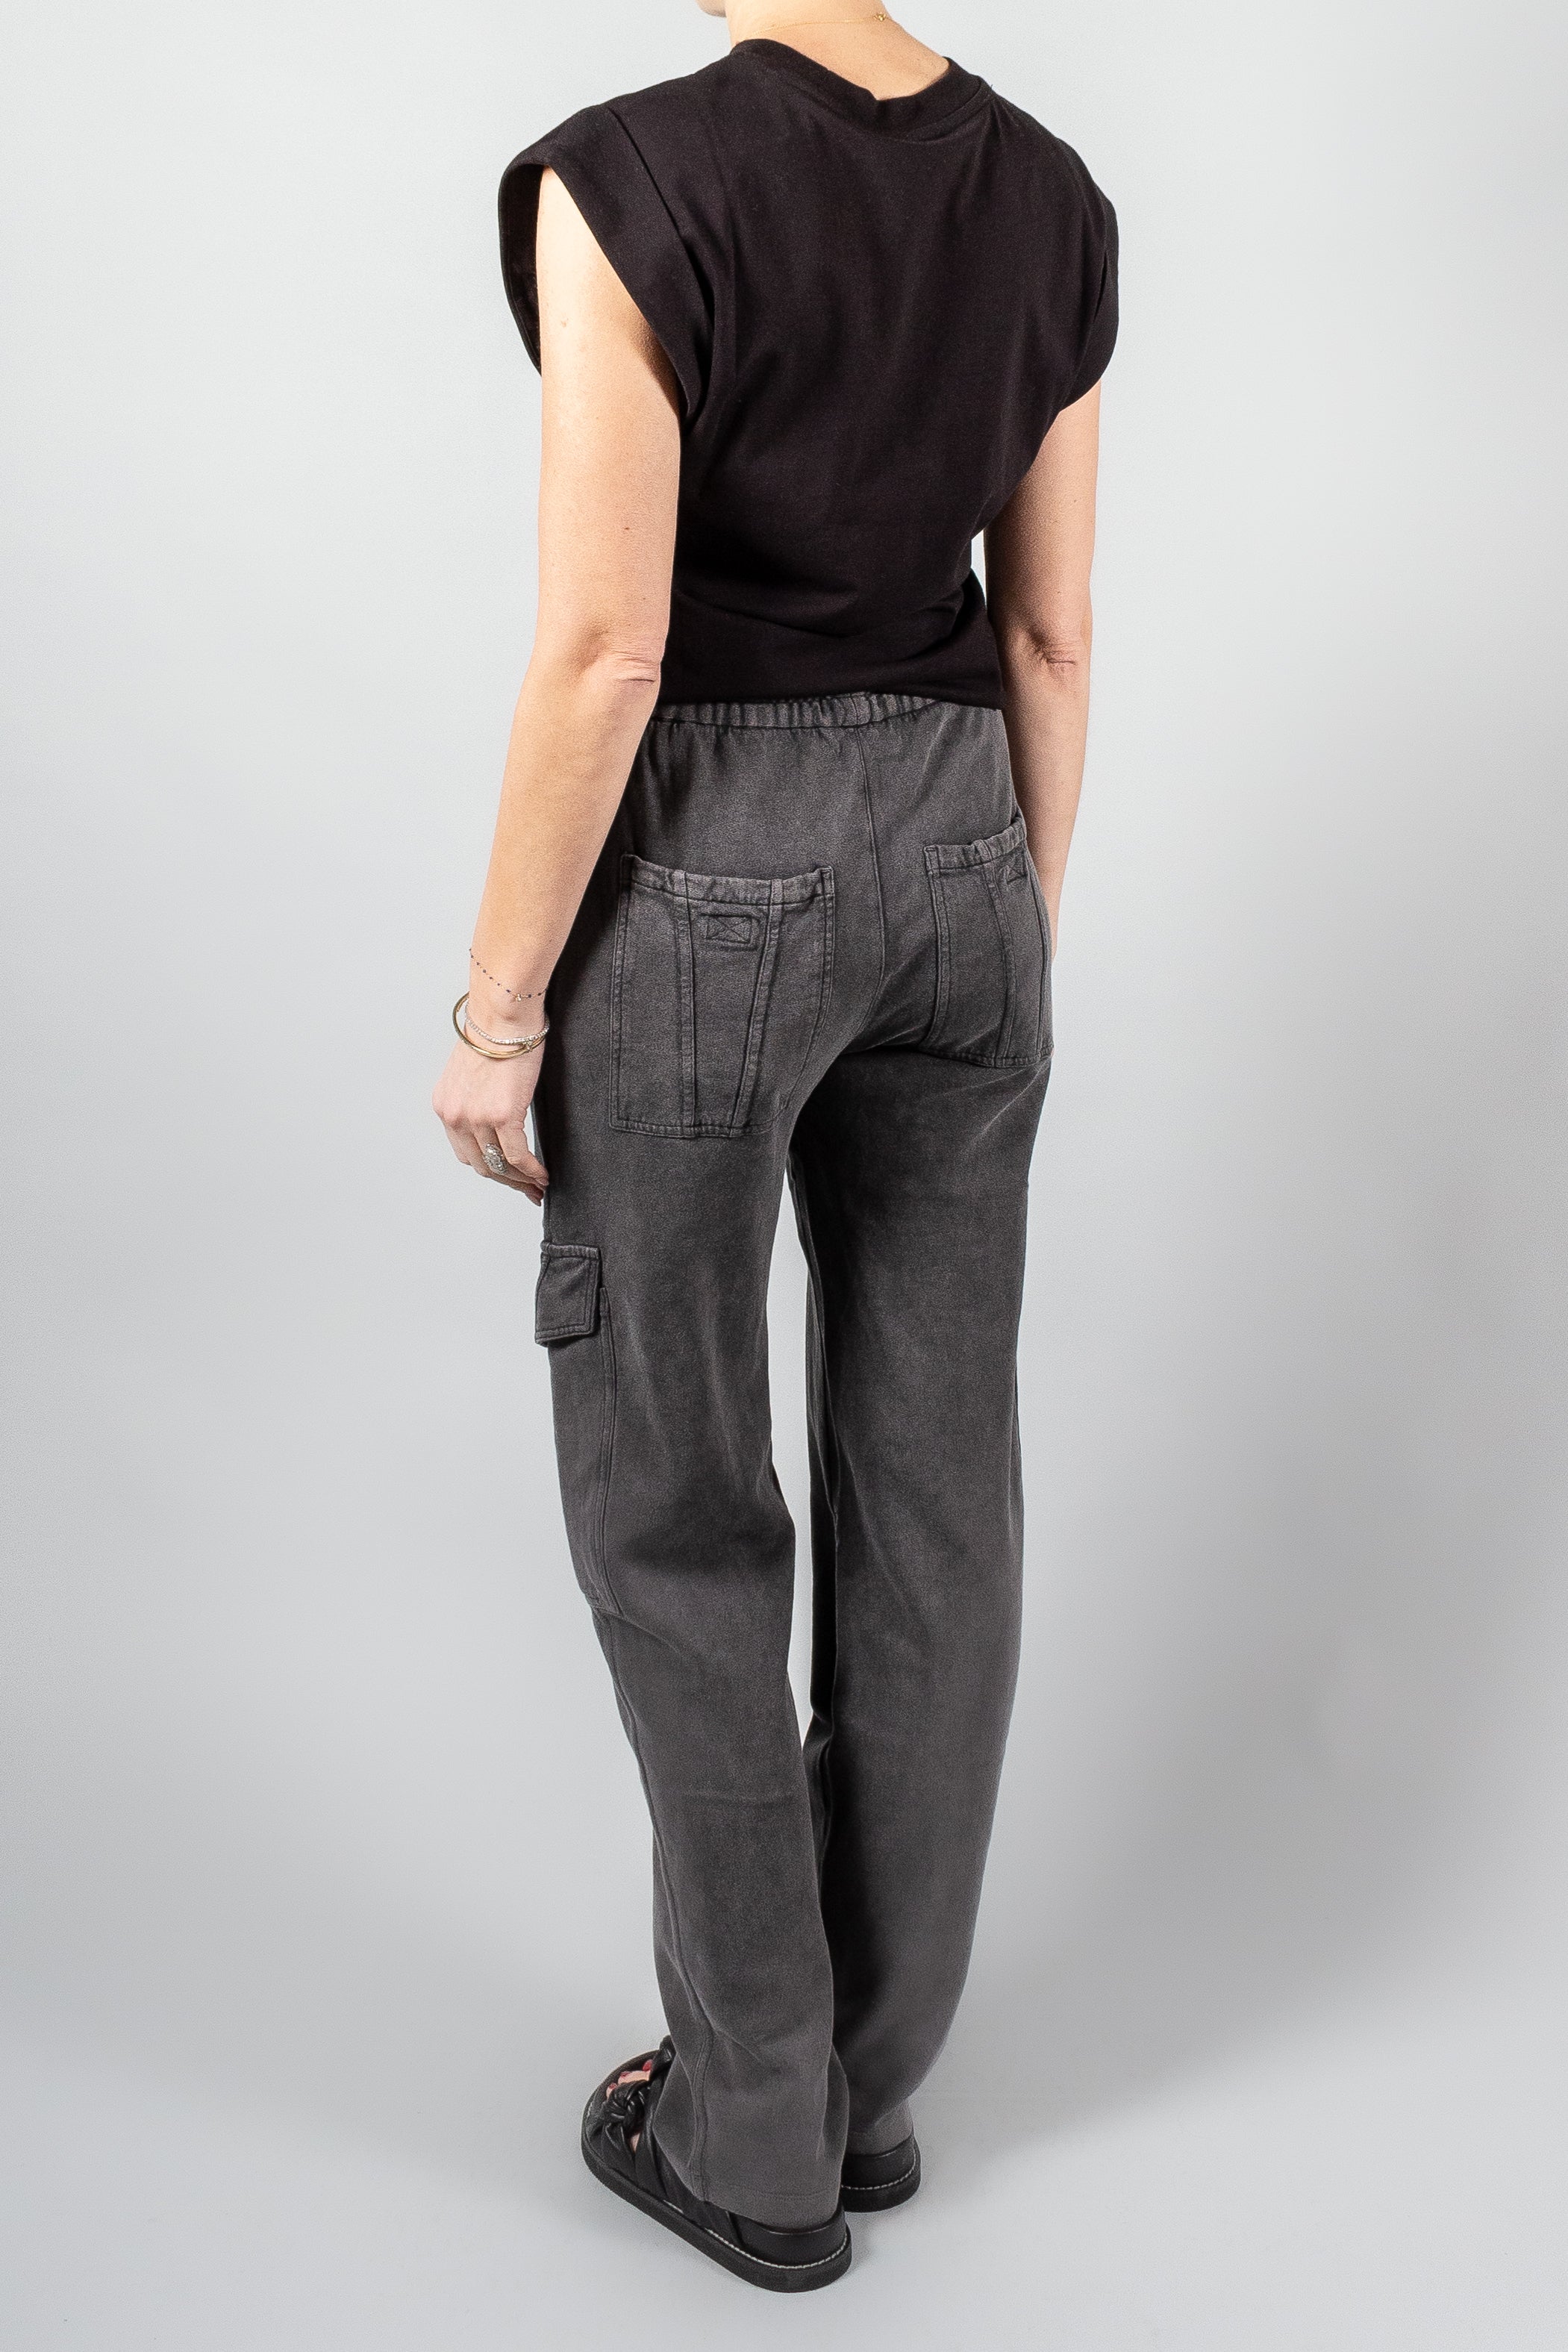 Isabel Marant Etoile Peorana Pants-Pants and Shorts-Misch-Boutique-Vancouver-Canada-misch.ca